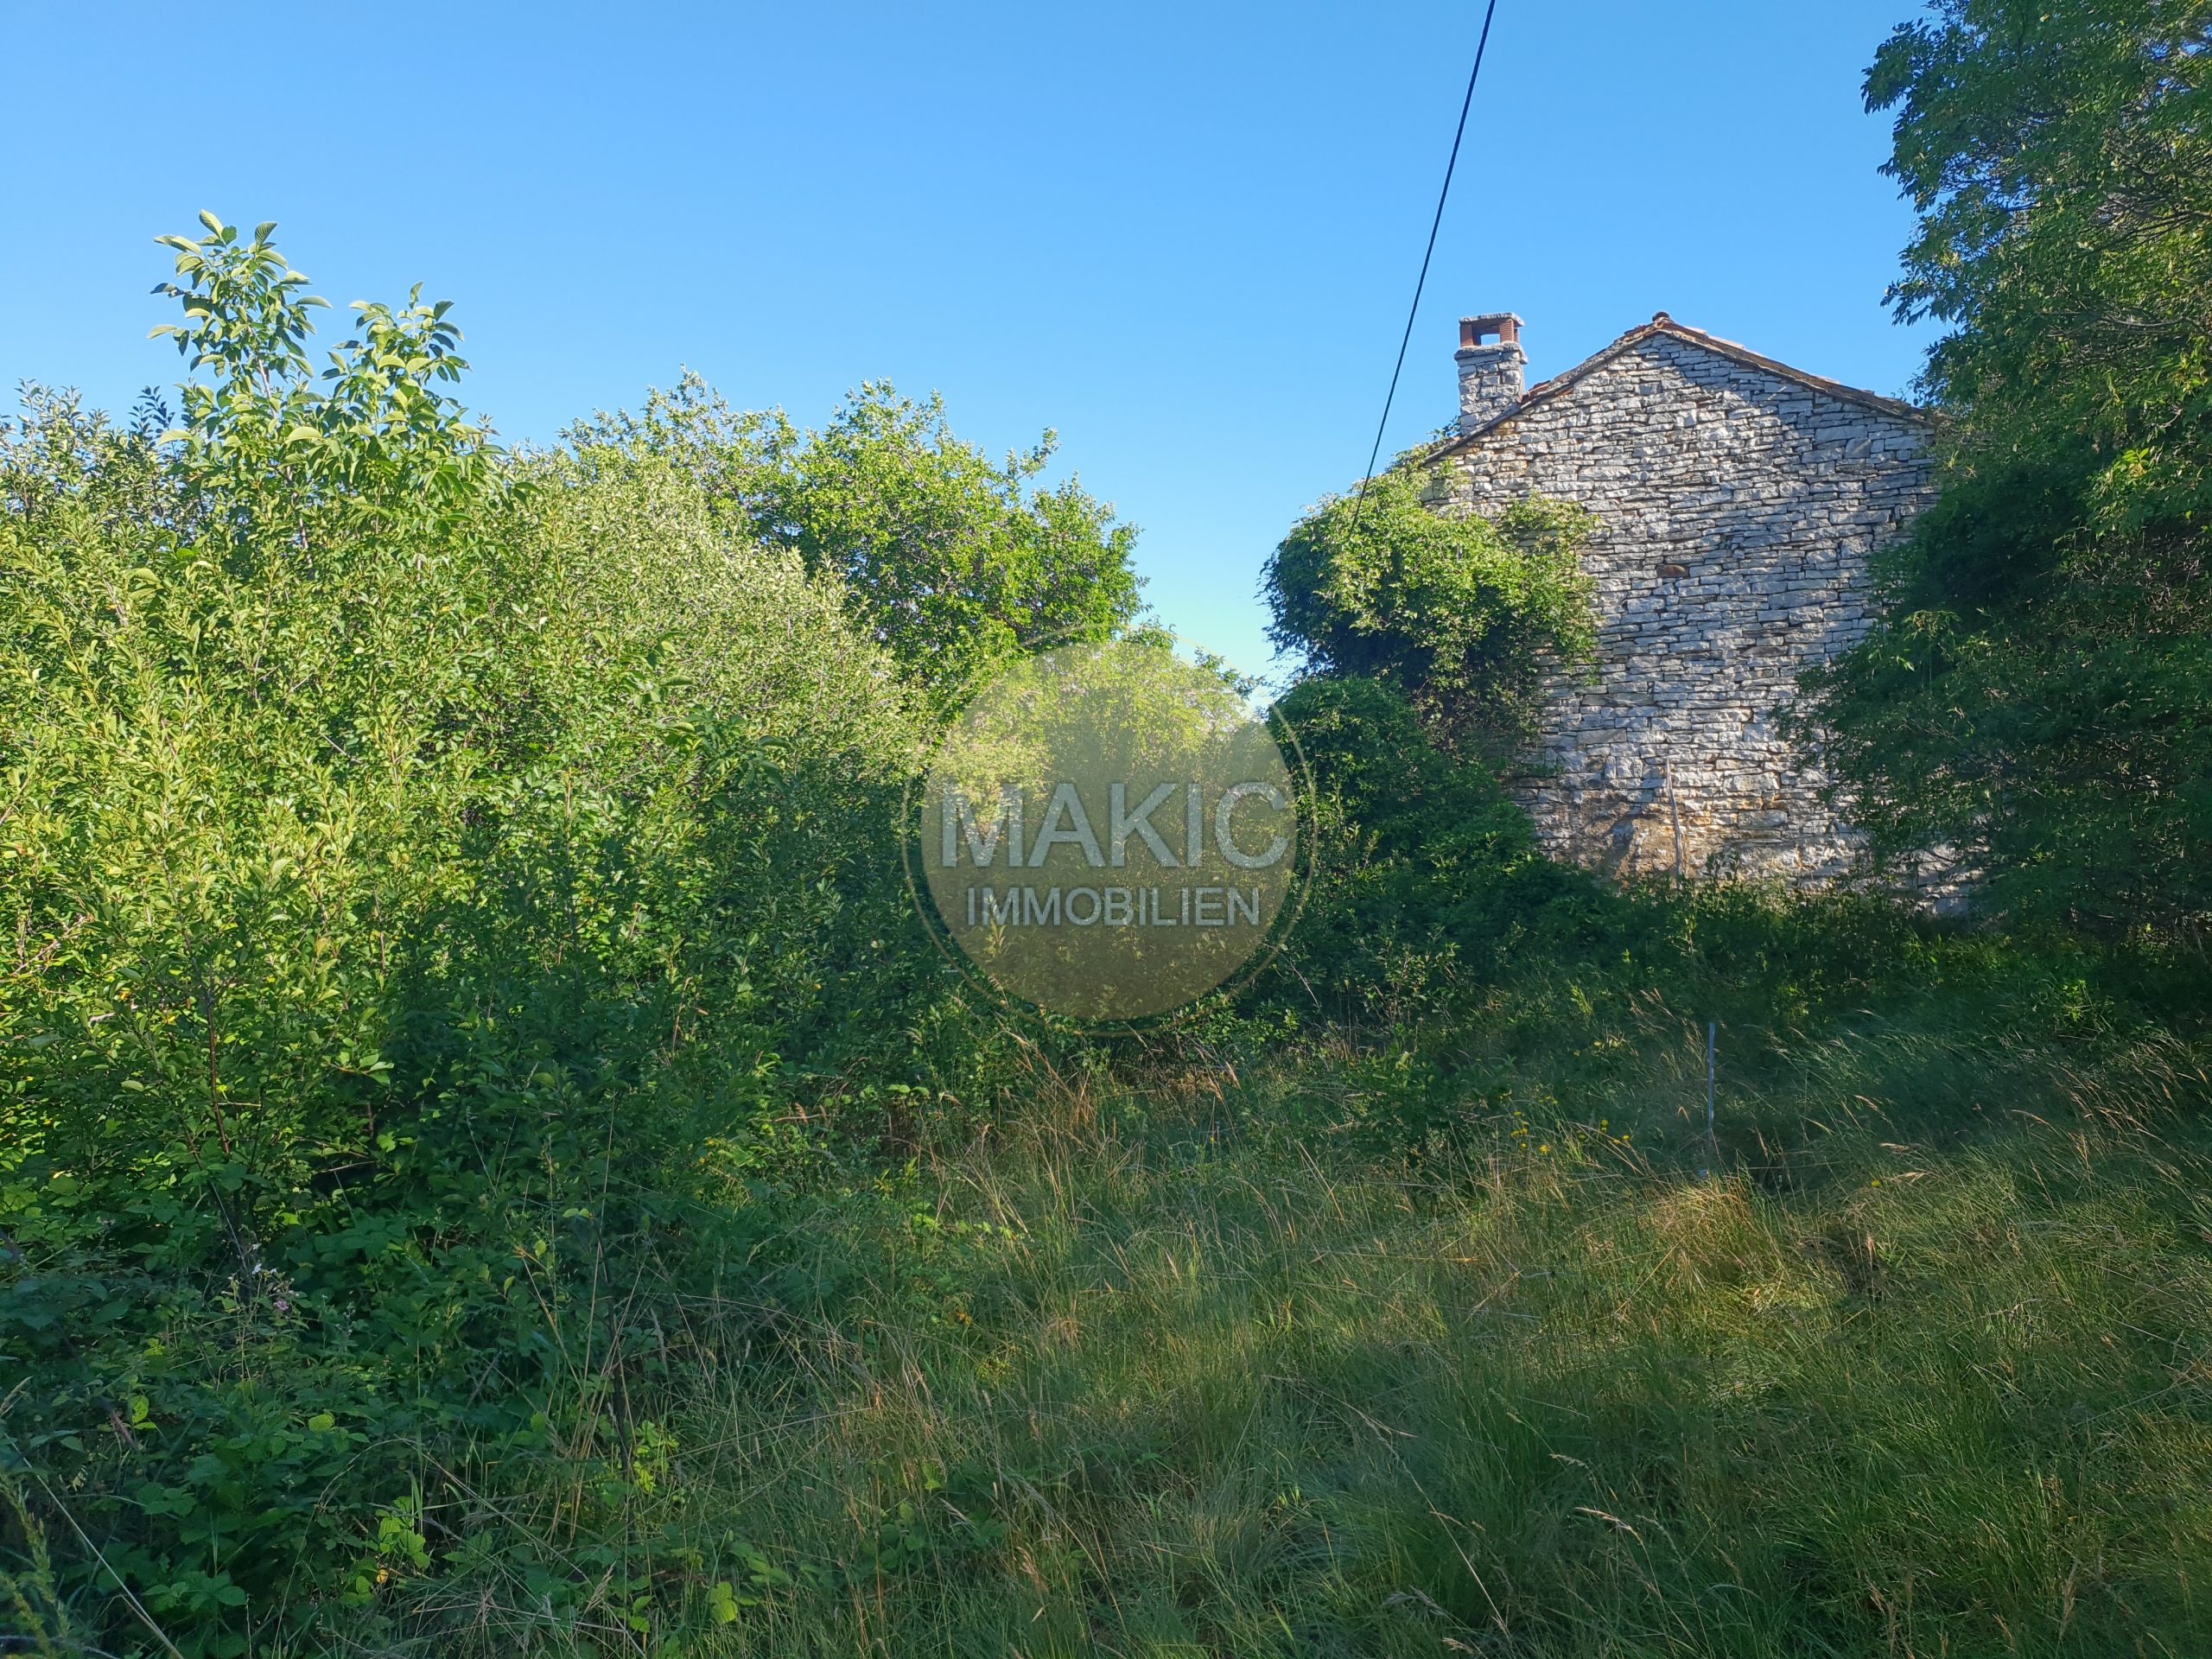 ISTRIA – Stone house in need of renovation